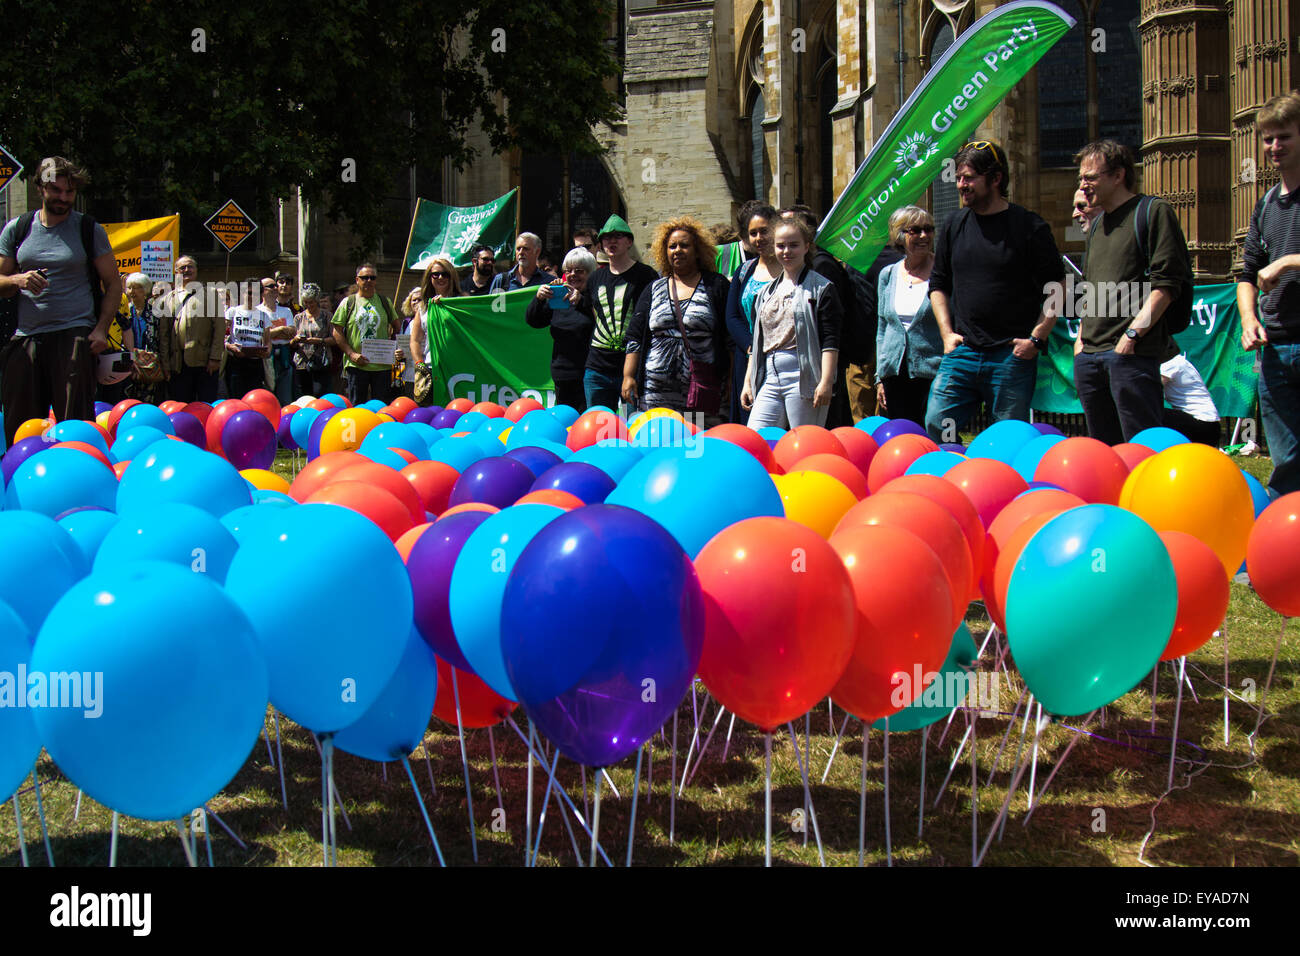 London, UK. 25th July, 2015. Protesters gather outside the Houses of Parliament to demand electoral reform, including proportional representation rather than the first-past-the-post method that saw the Tories gain a majority. : Credit:  Paul Davey/Alamy Live News Stock Photo